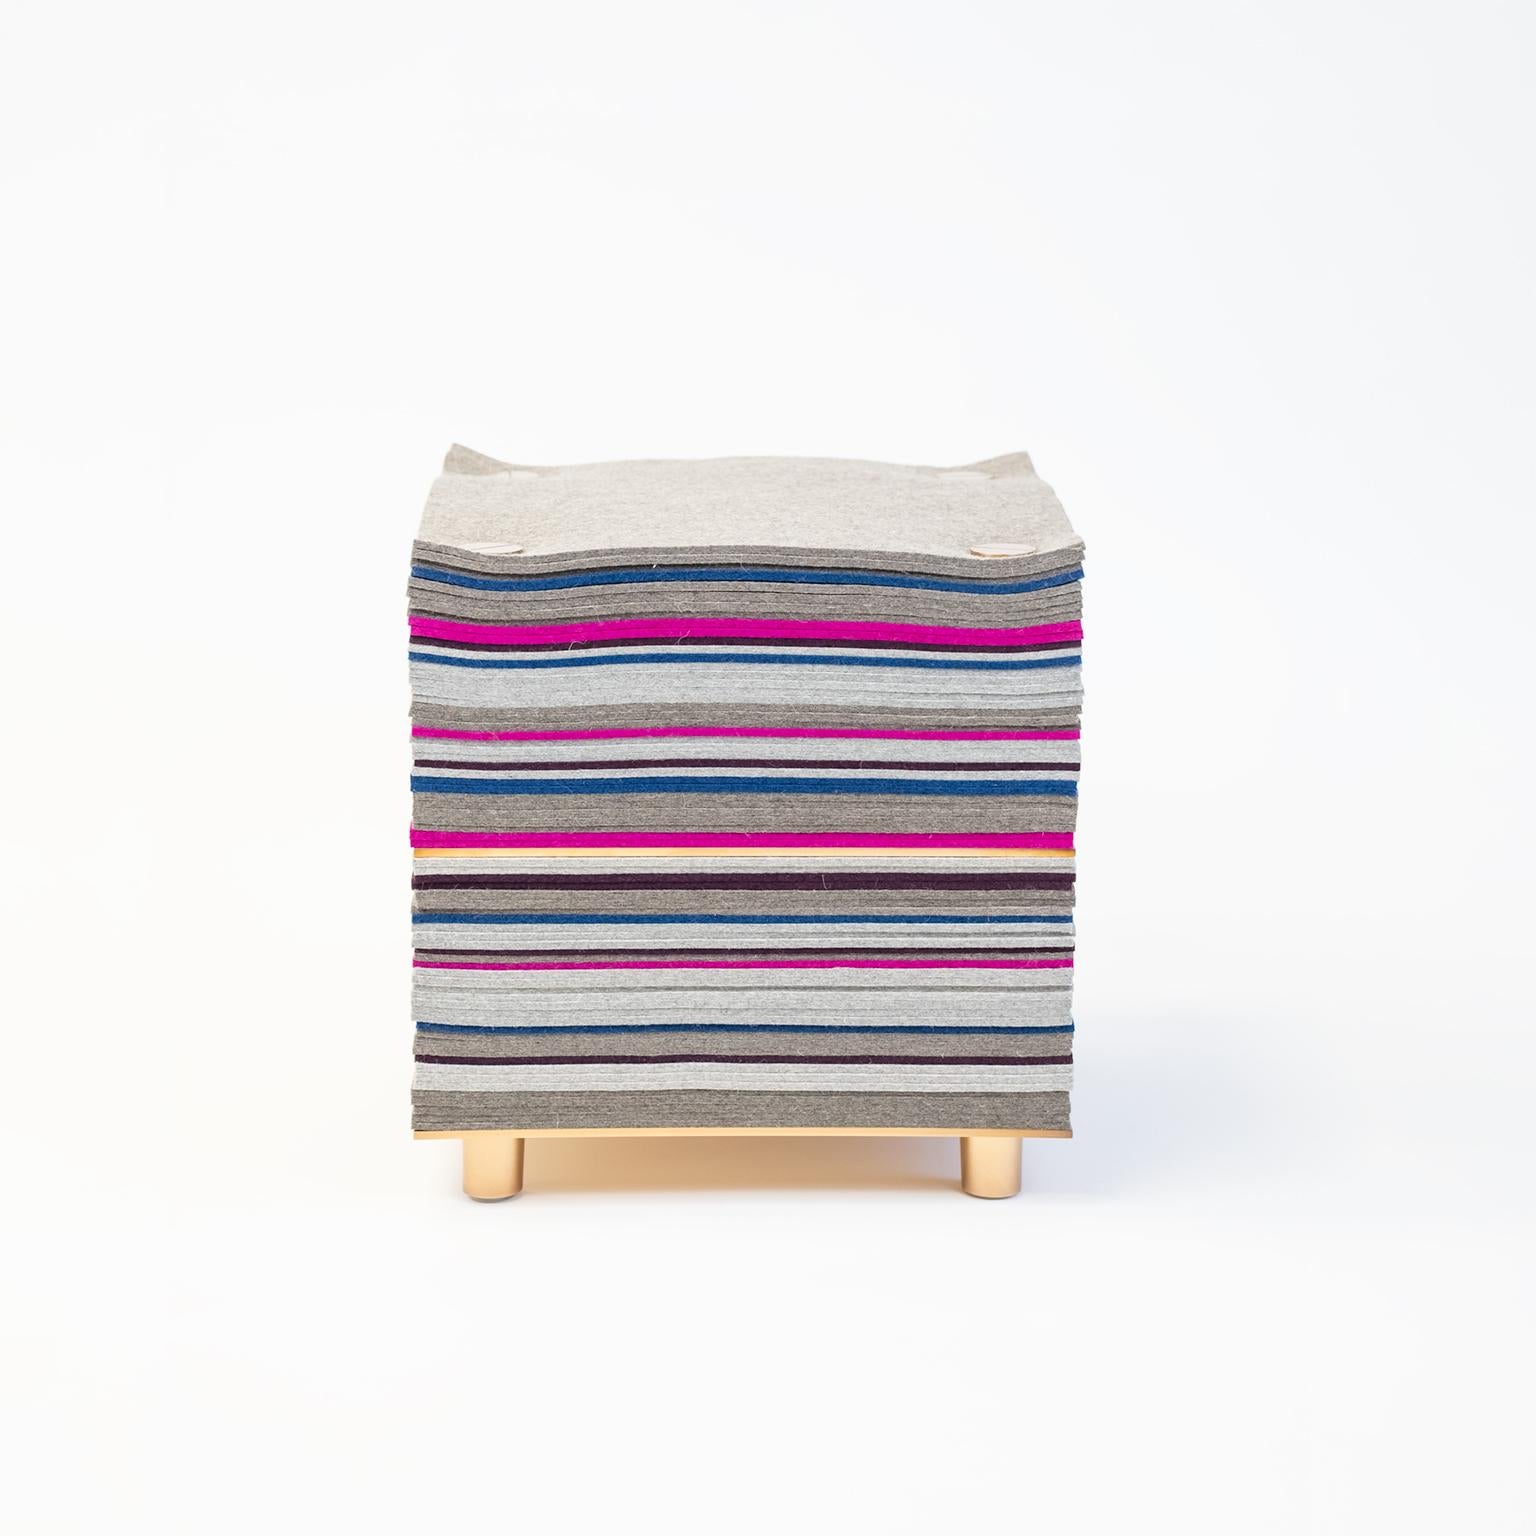 The Felt series stool features a plush seating surface made of layers of premium natural merino wool felt. The stack is held together by STACKLAB’s signature plated-steel clamping hardware.

The felt stack mixes colored and grey layers. An